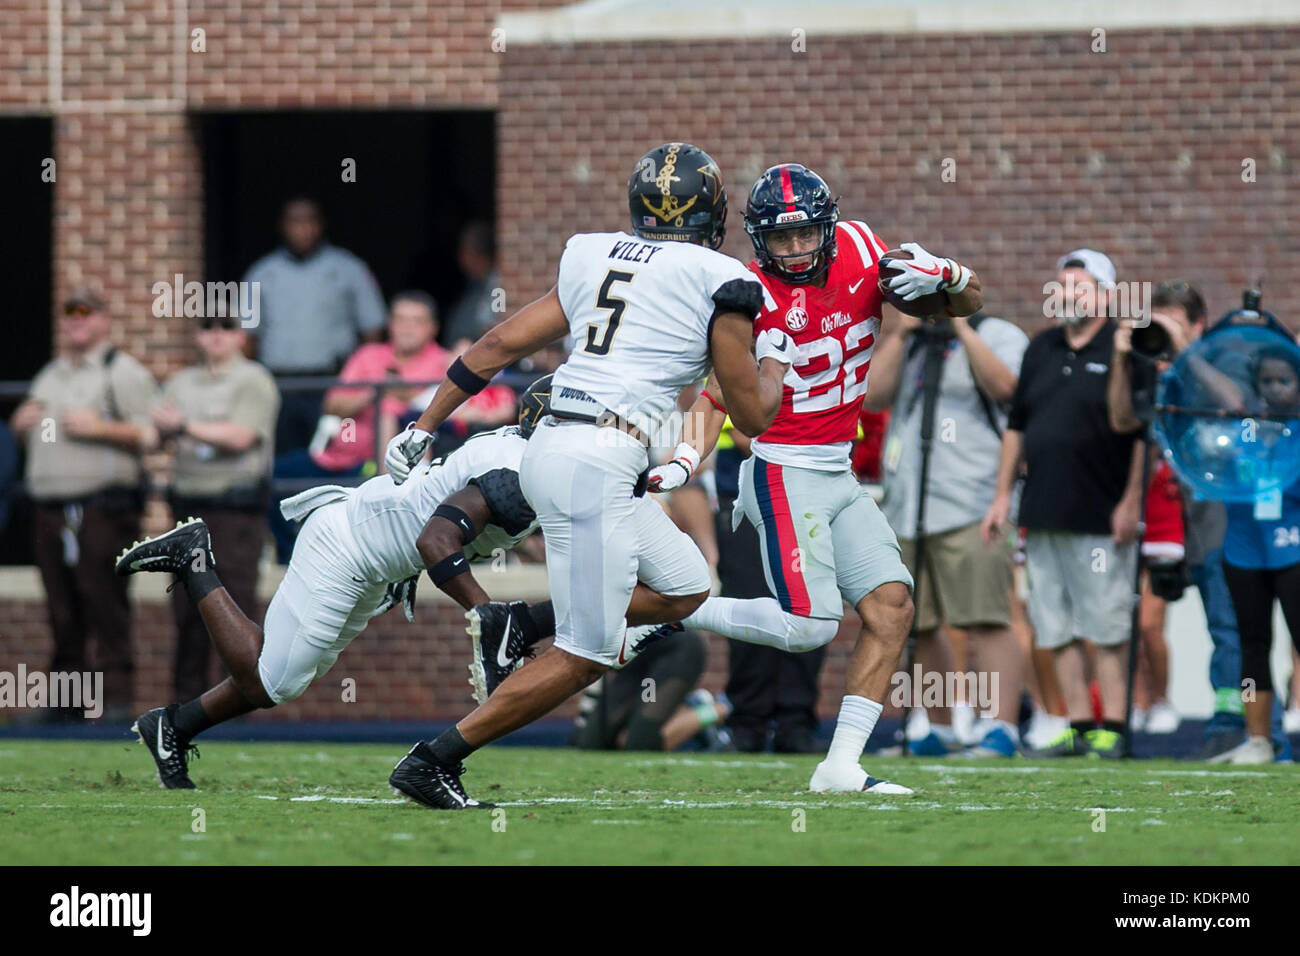 Oxford, USA.  14th October 2017. The University of Mississippi’s Jordan Wilkins (22) tries to avoid being tackled by Vanderbilt’s LaDarius Wiley (5) early in the contest at Vaught-Hemingway Stadium in Oxford, Mississippi, on Saturday, October 14, 2107.  Credit: Kevin Williams/Alamy Live News. Stock Photo